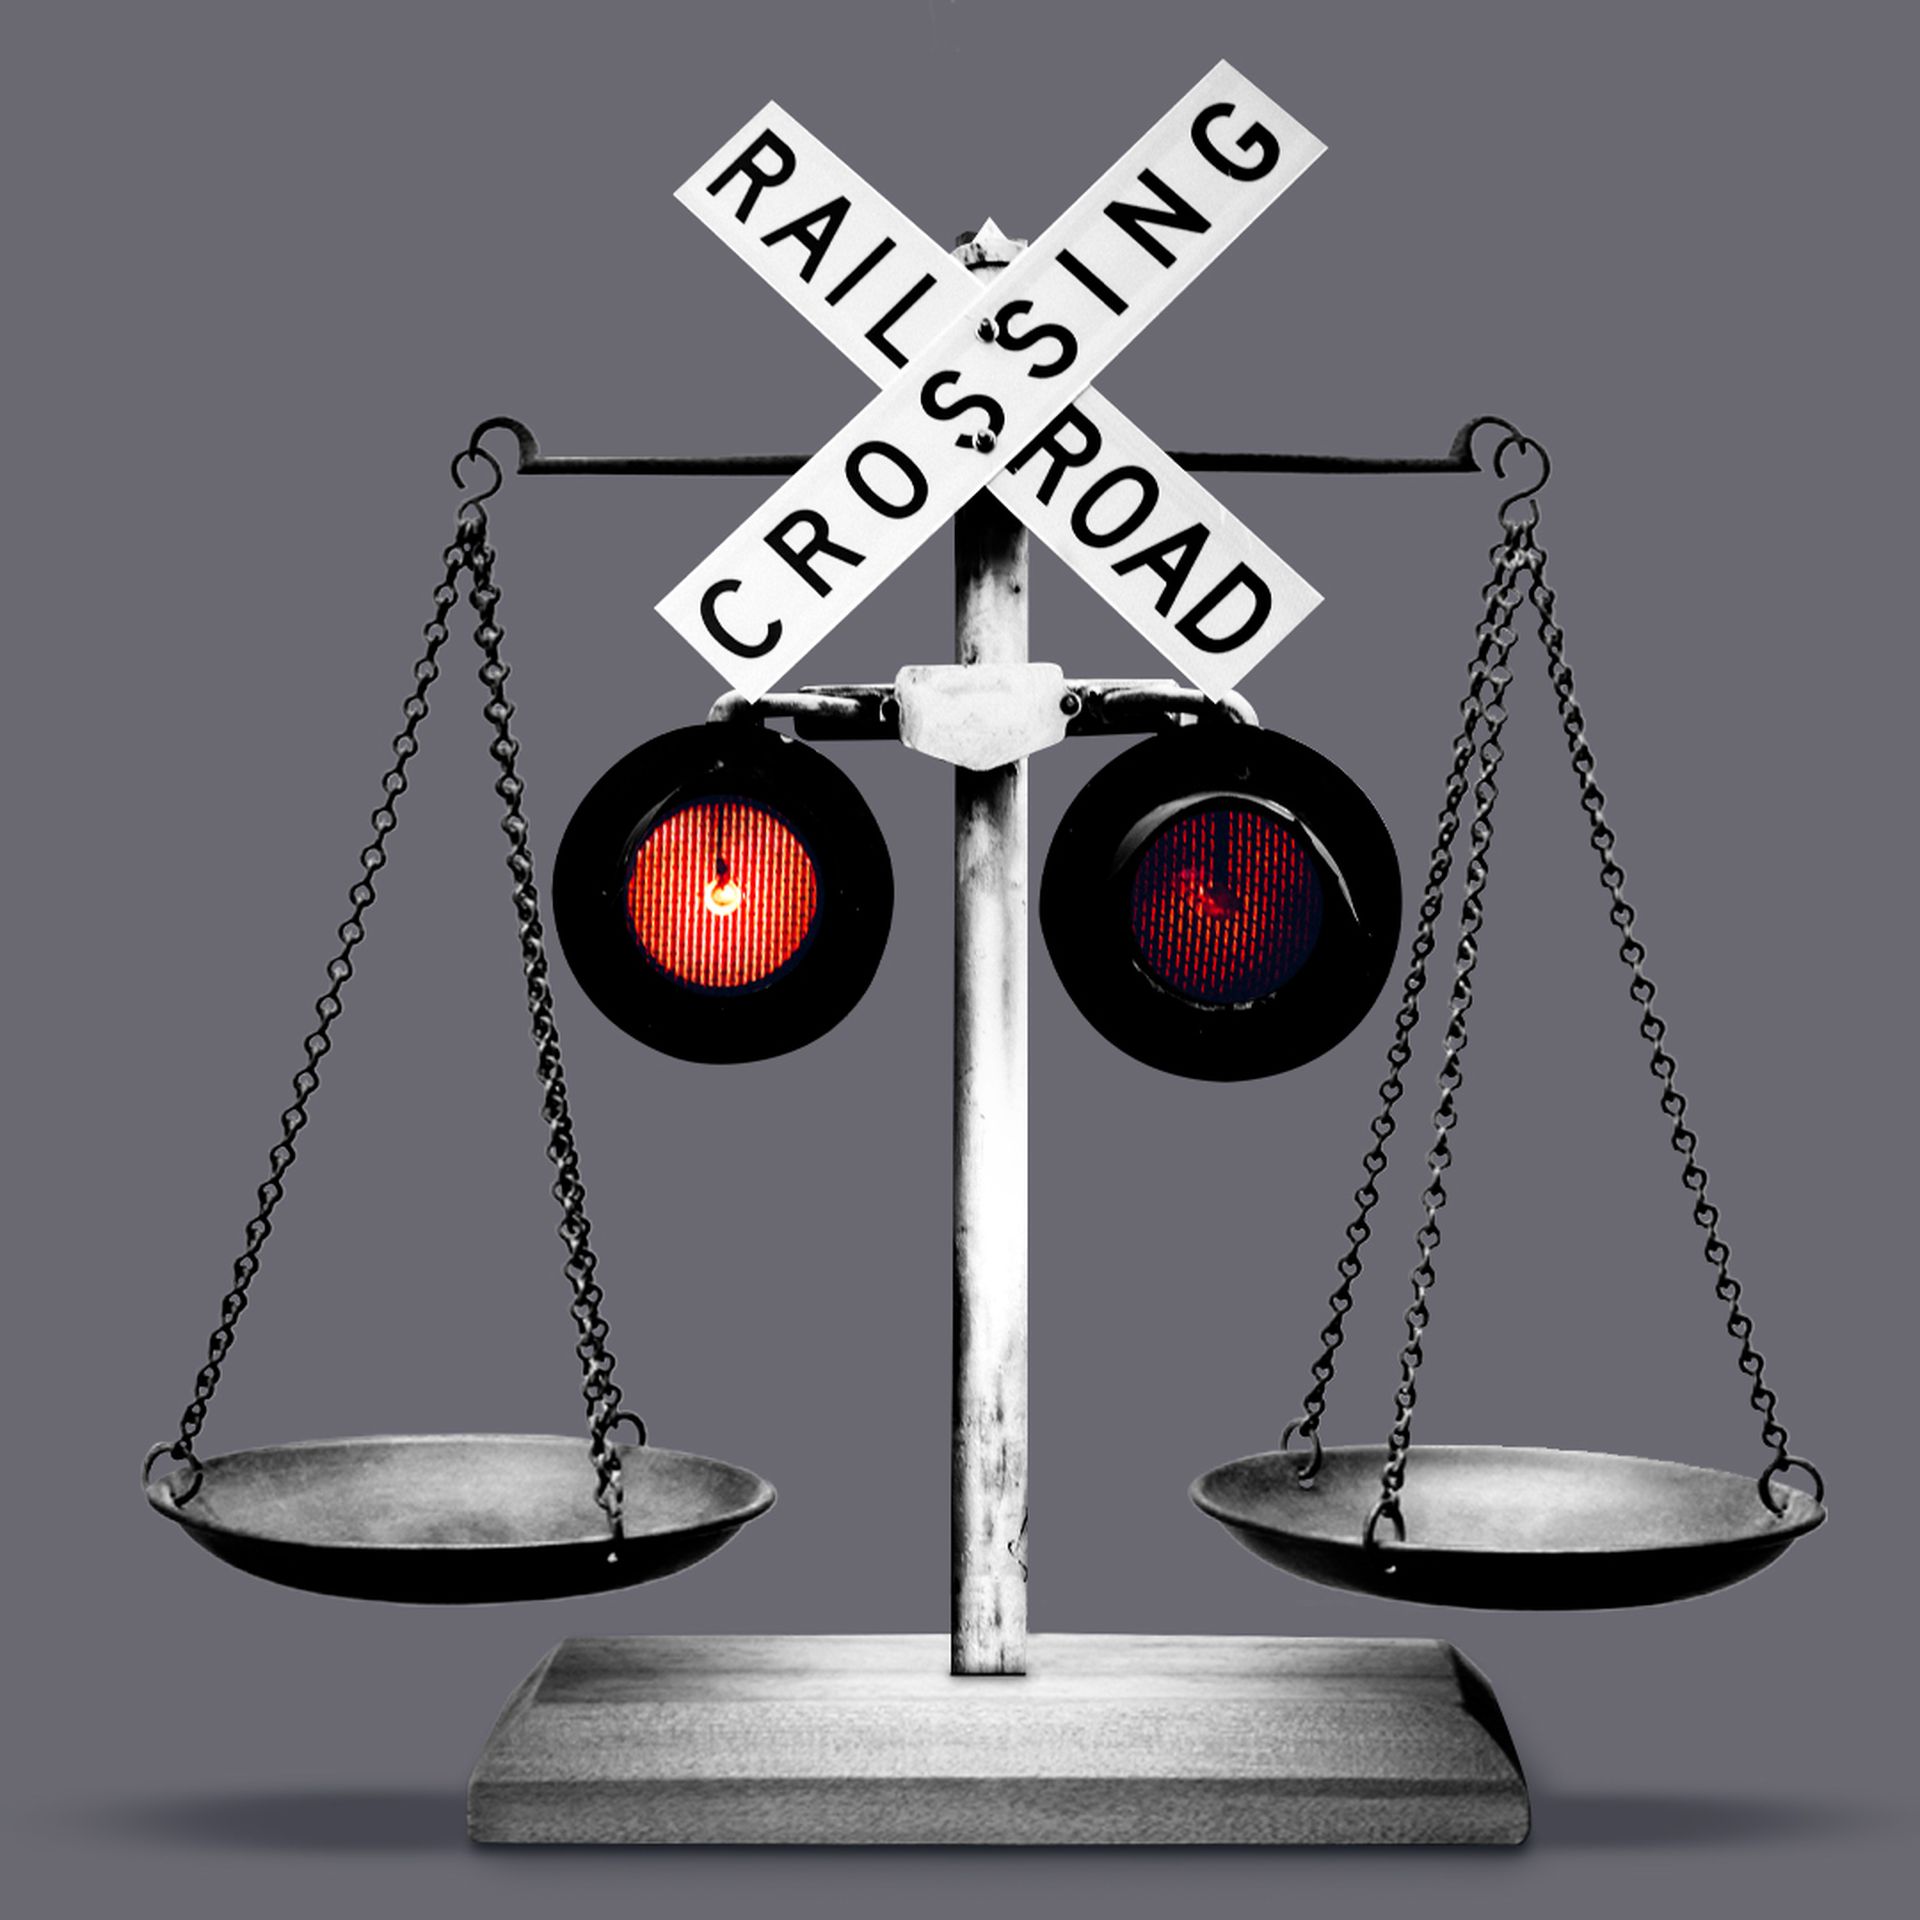 An illustration of scales with railroad crossing lights blinking